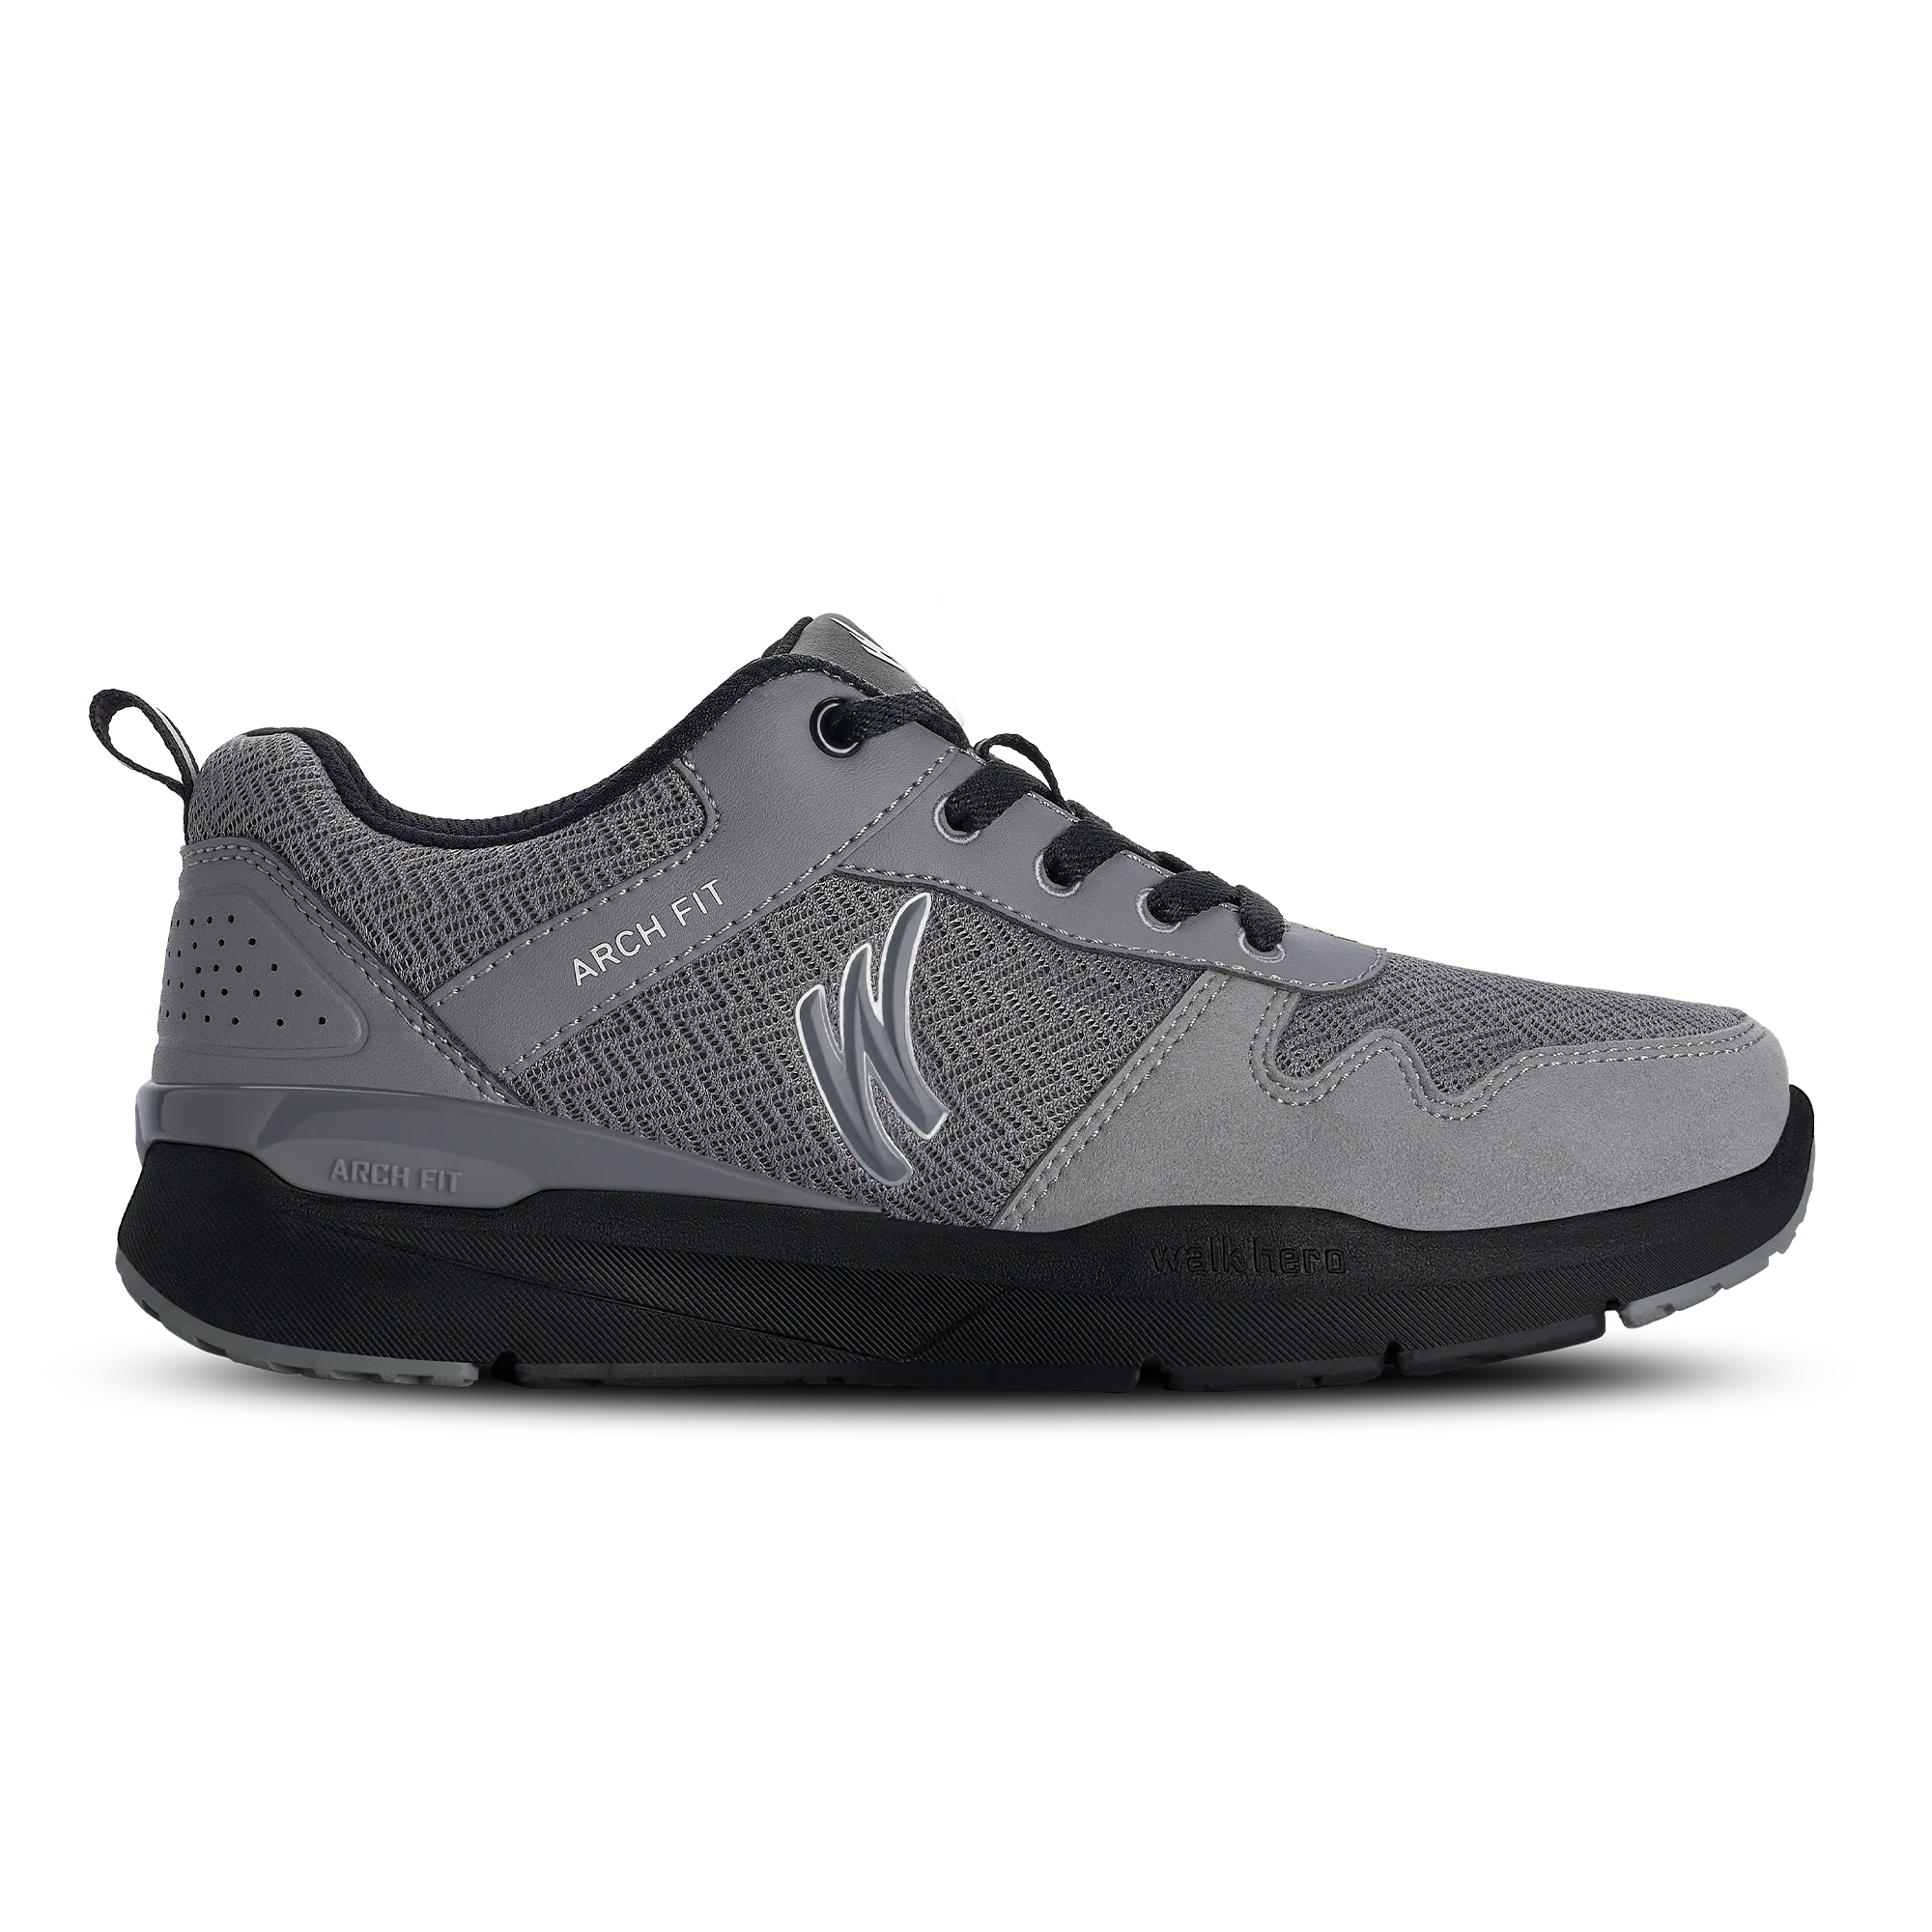 WalkHero Wide Toe Shoes With Arch Support